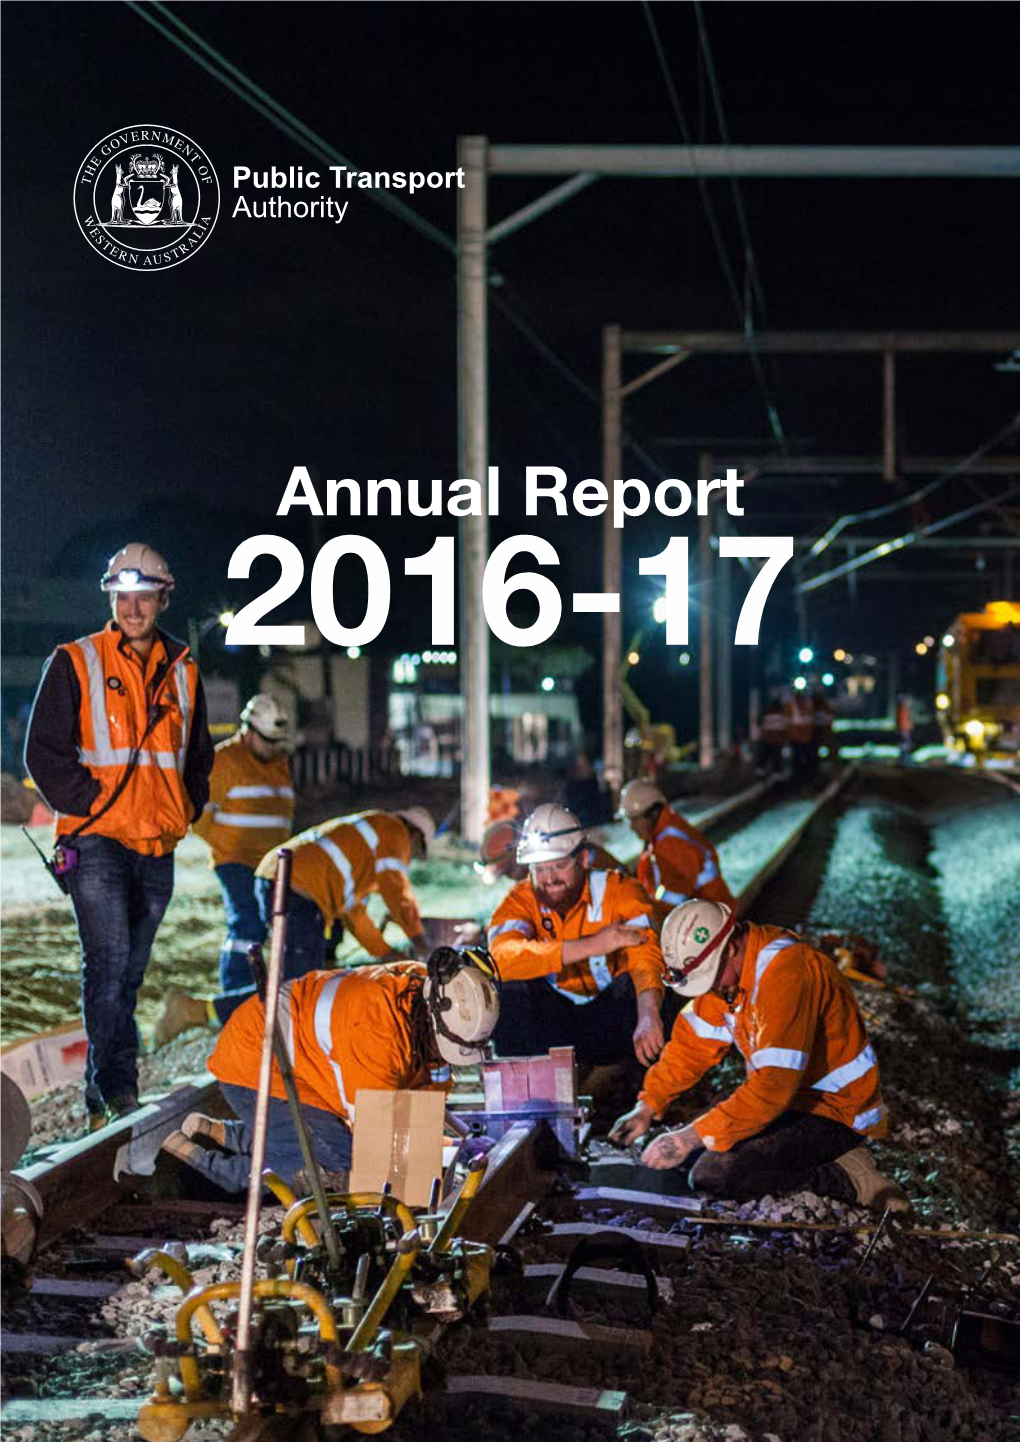 Annual Report 2016-17 2 PTA Annual Report / About This Report